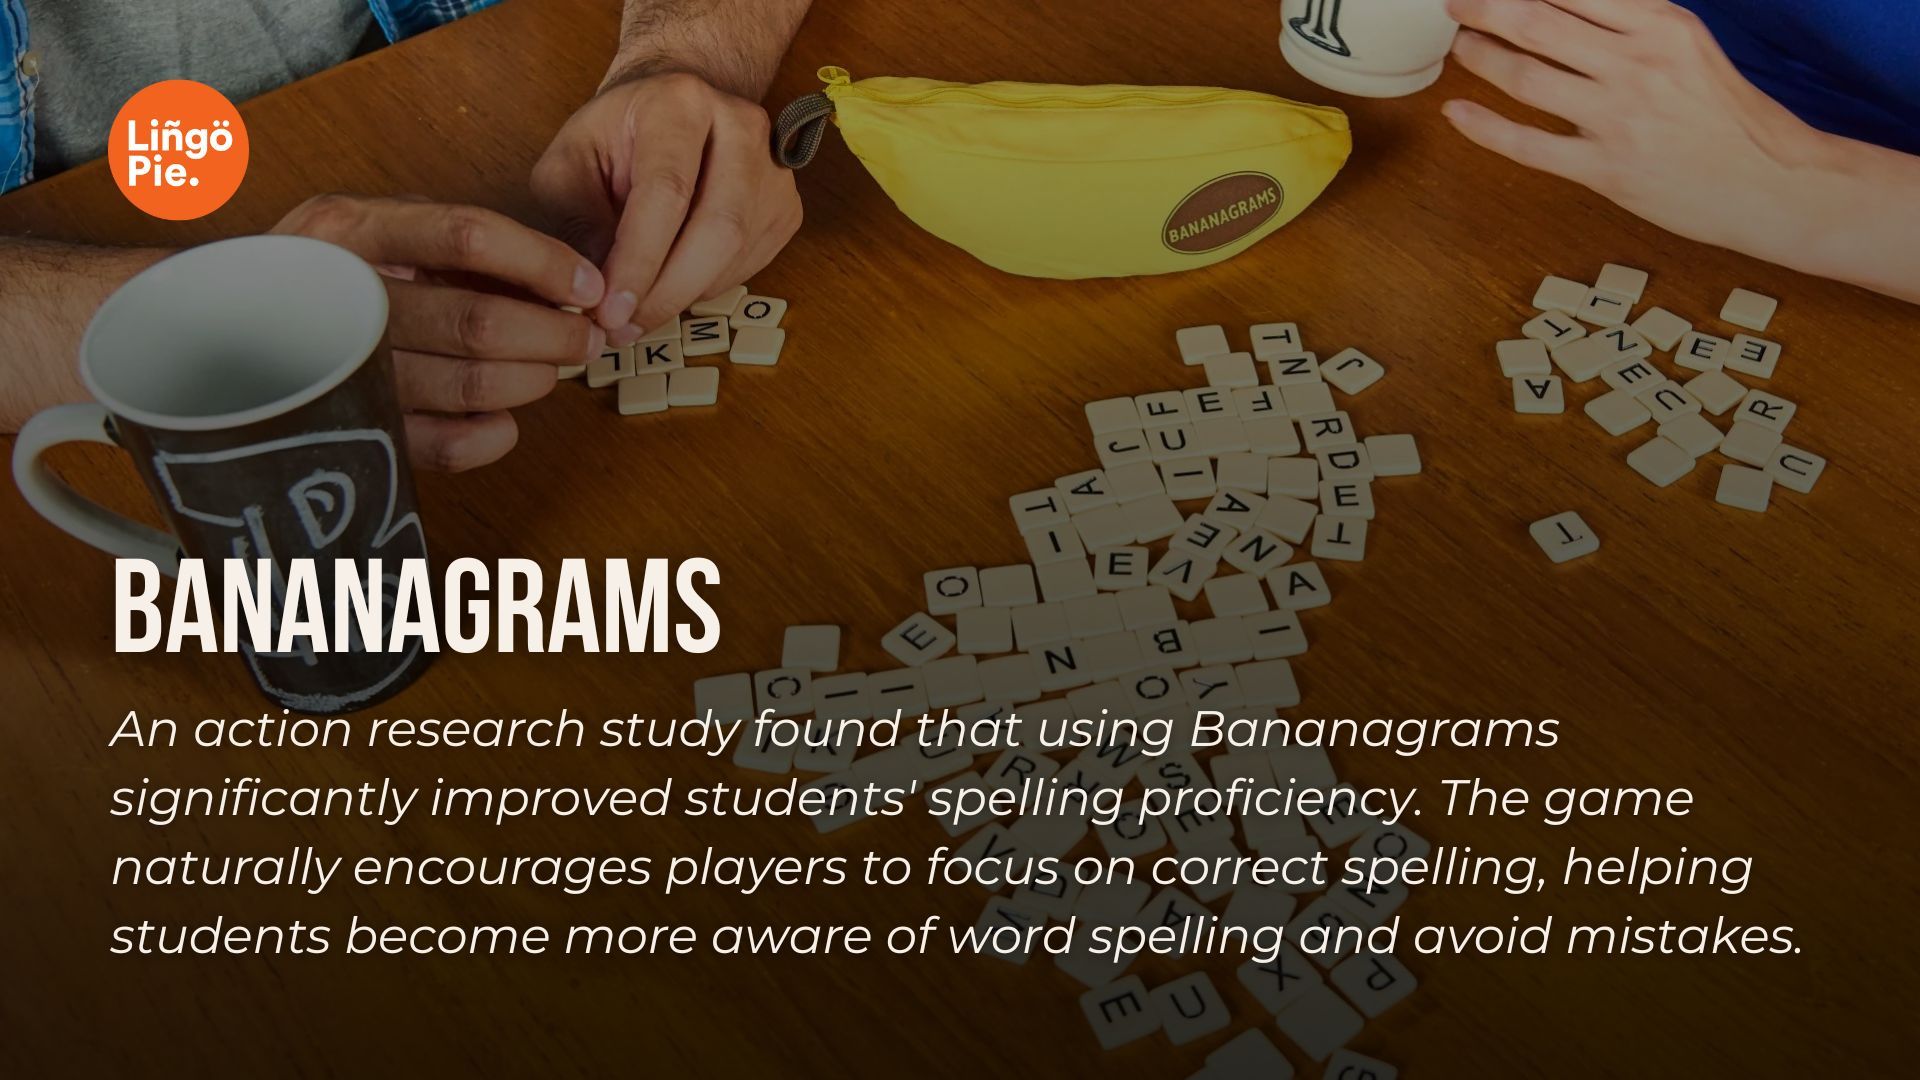 Bananagrams as a Language Learning Game